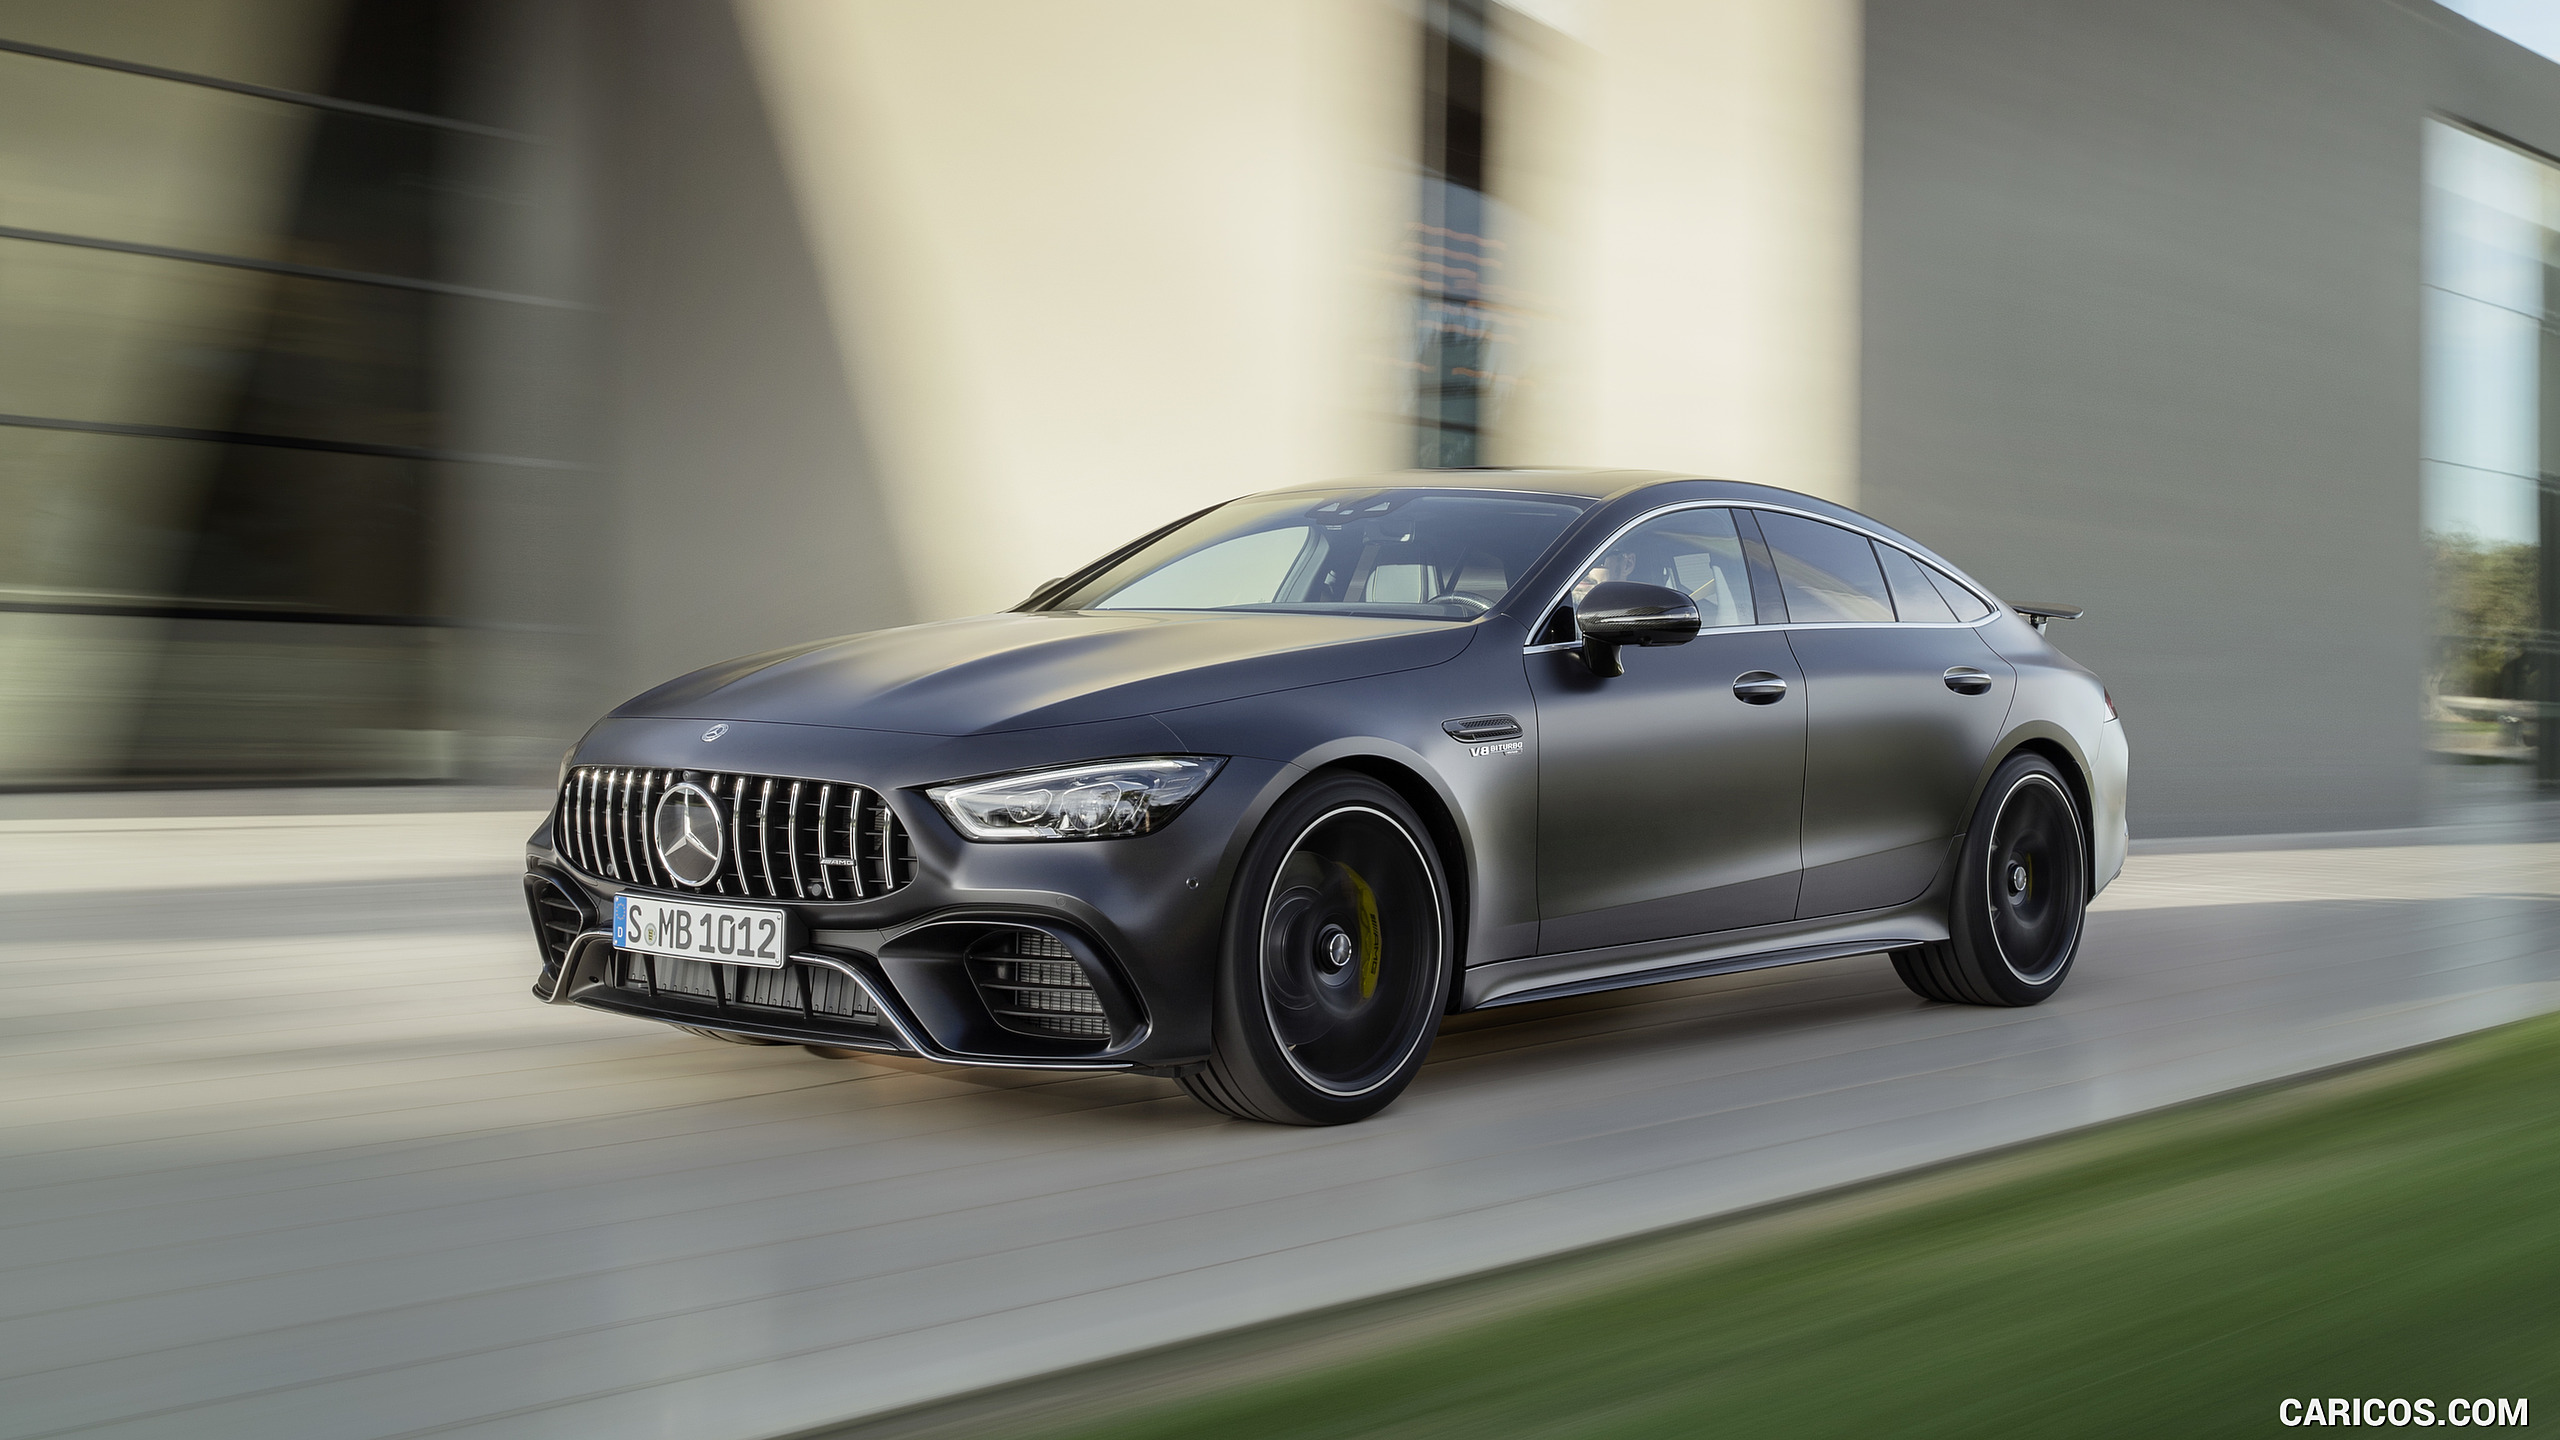 2019 Mercedes-AMG GT 63 S 4MATIC+ 4-Door Coupe (Color: Graphite Grey Magno) - Front Three-Quarter, #6 of 427